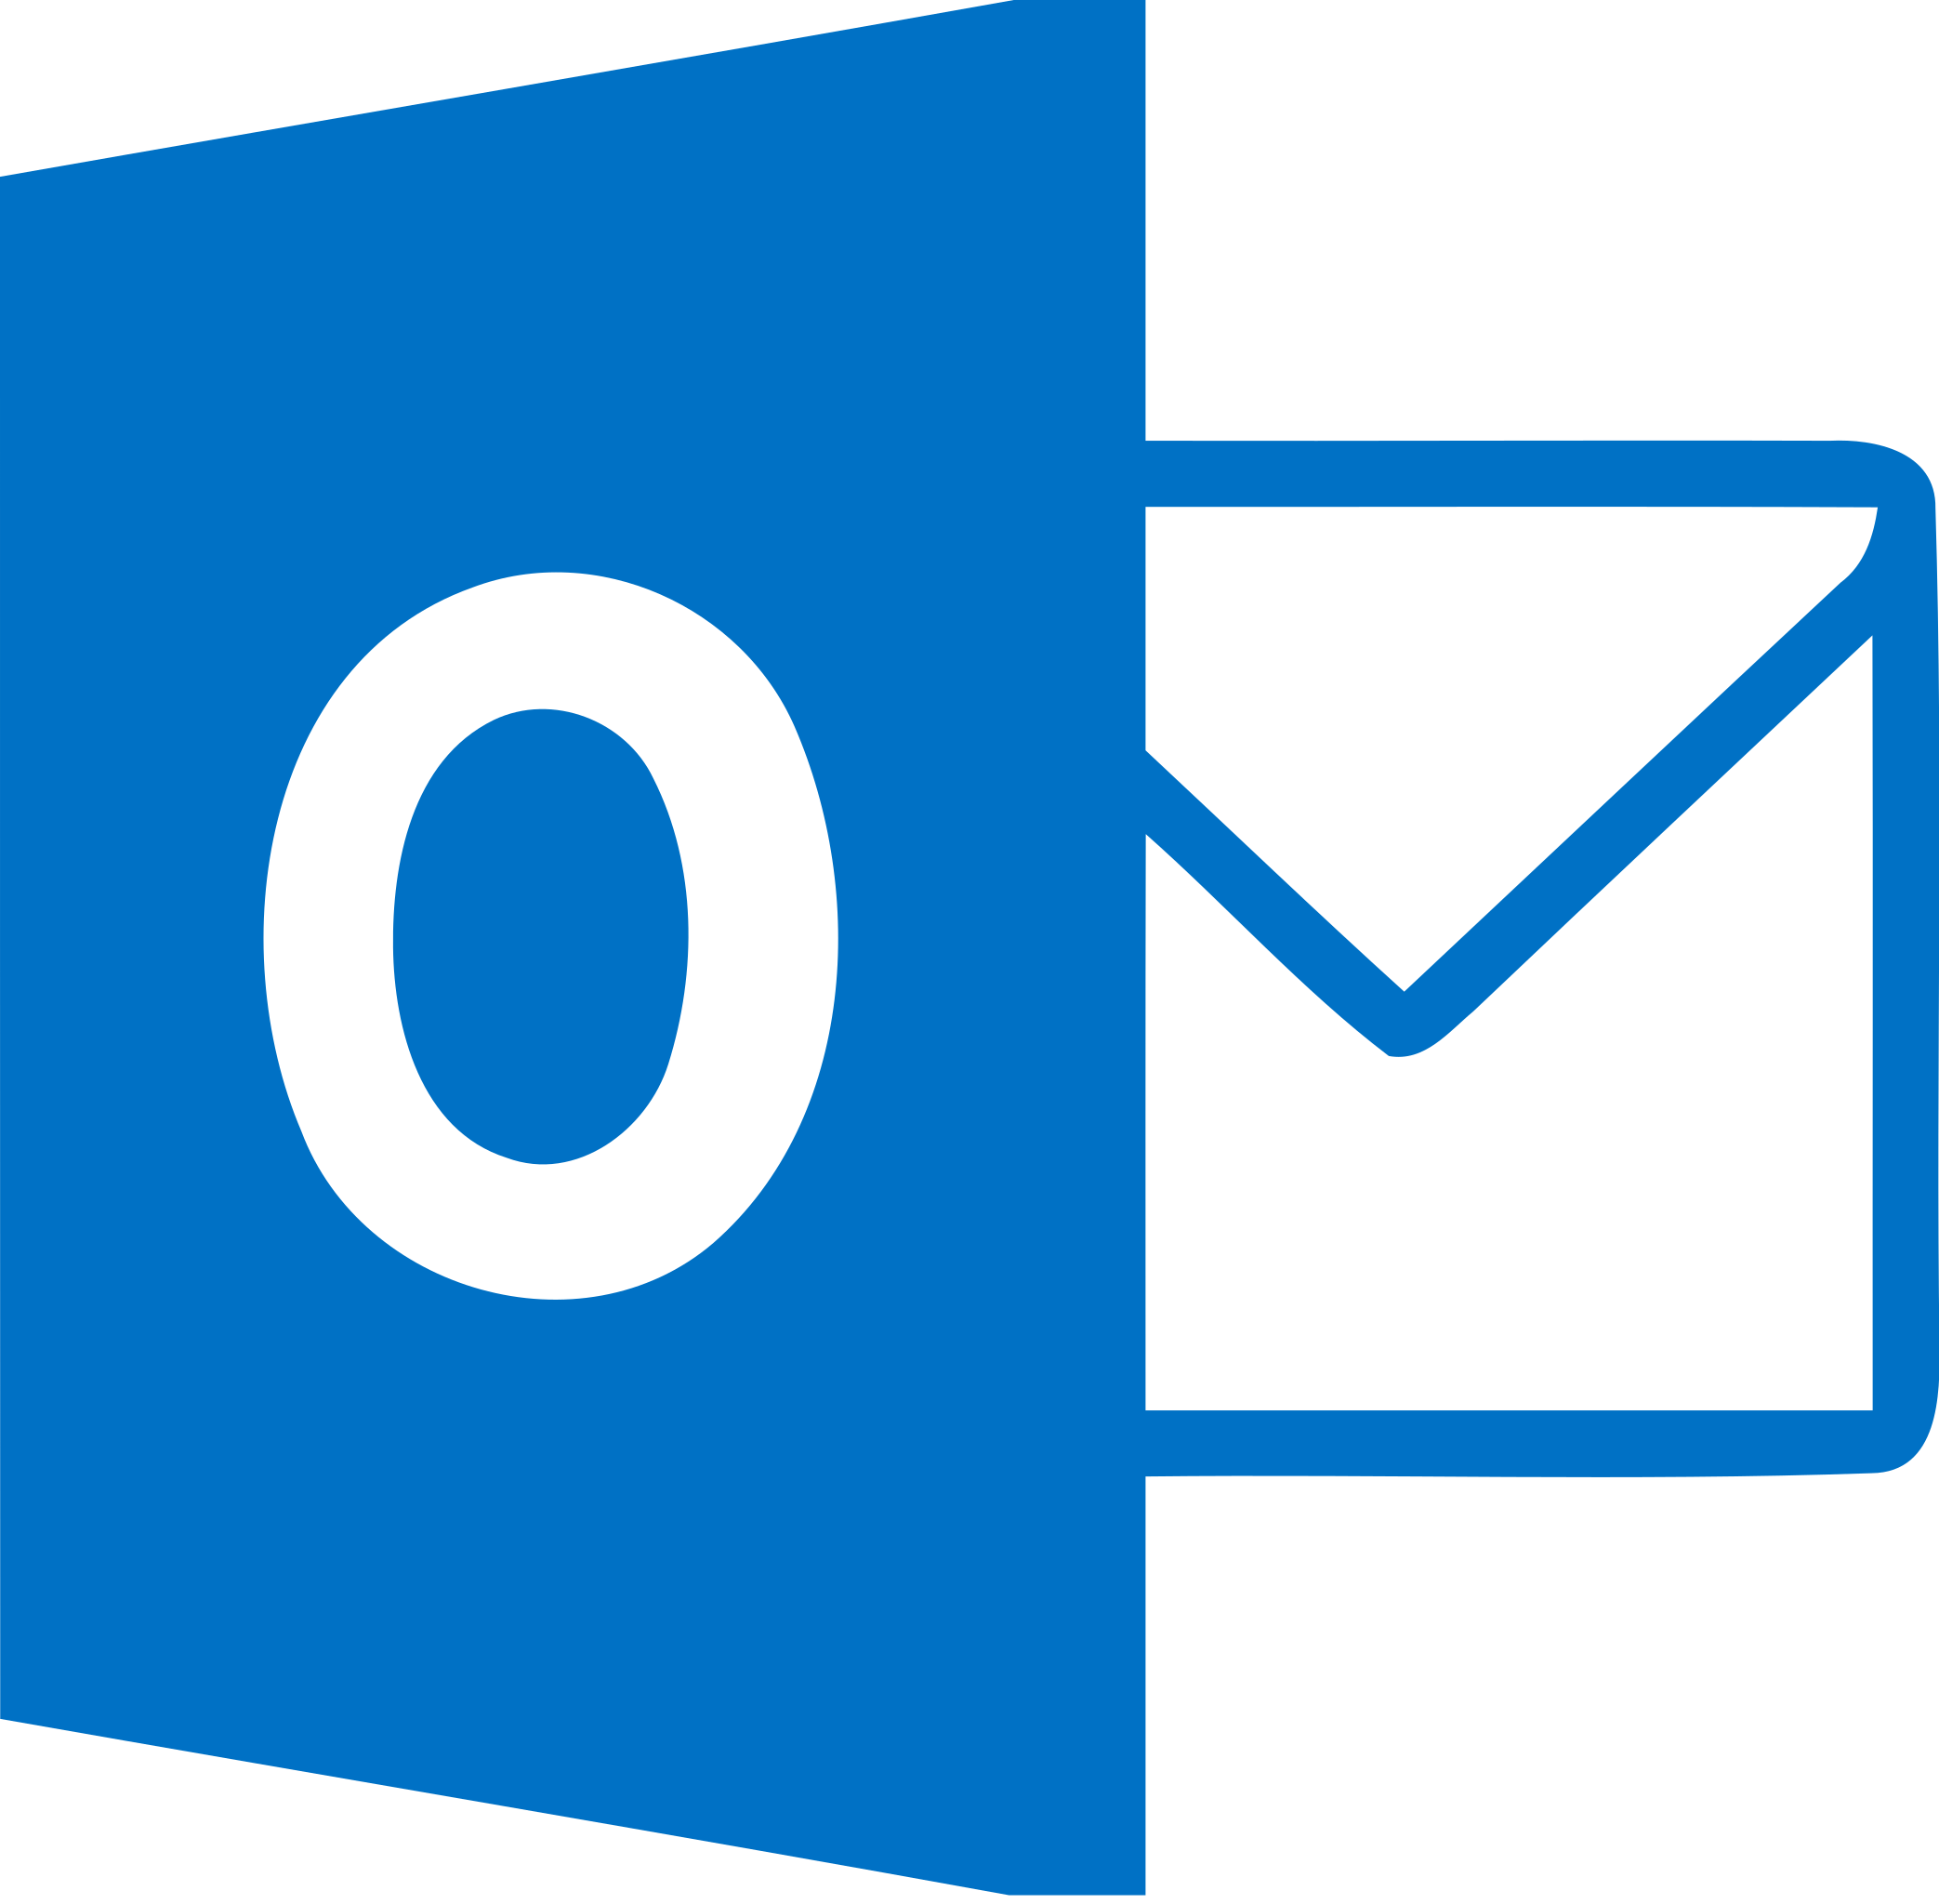 Setting up Microsoft Outlook 2013